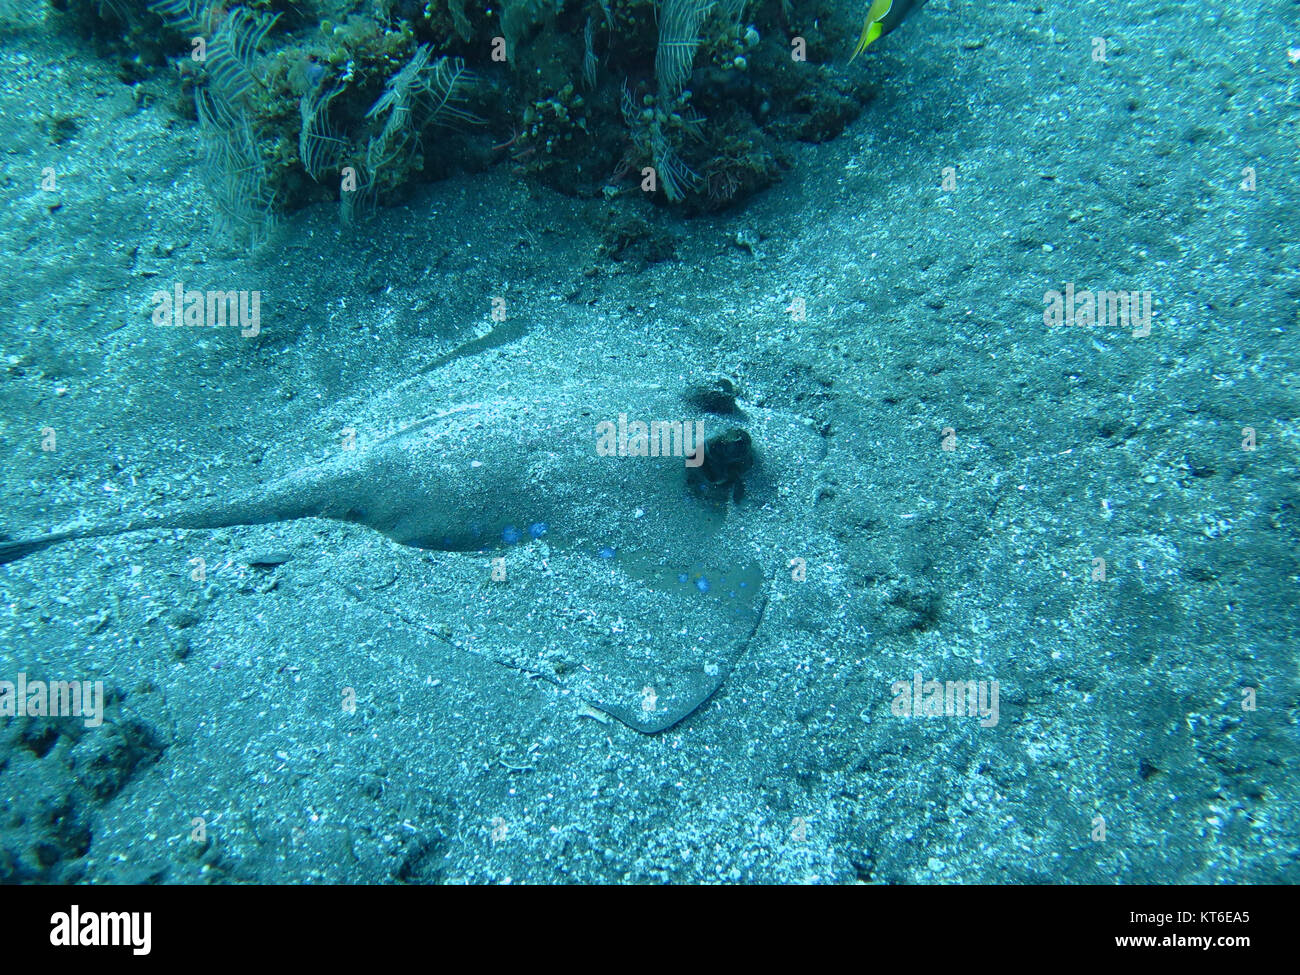 Blue spotted ray swimming amongst coral reef on the ocean floor, Bali Stock Photo